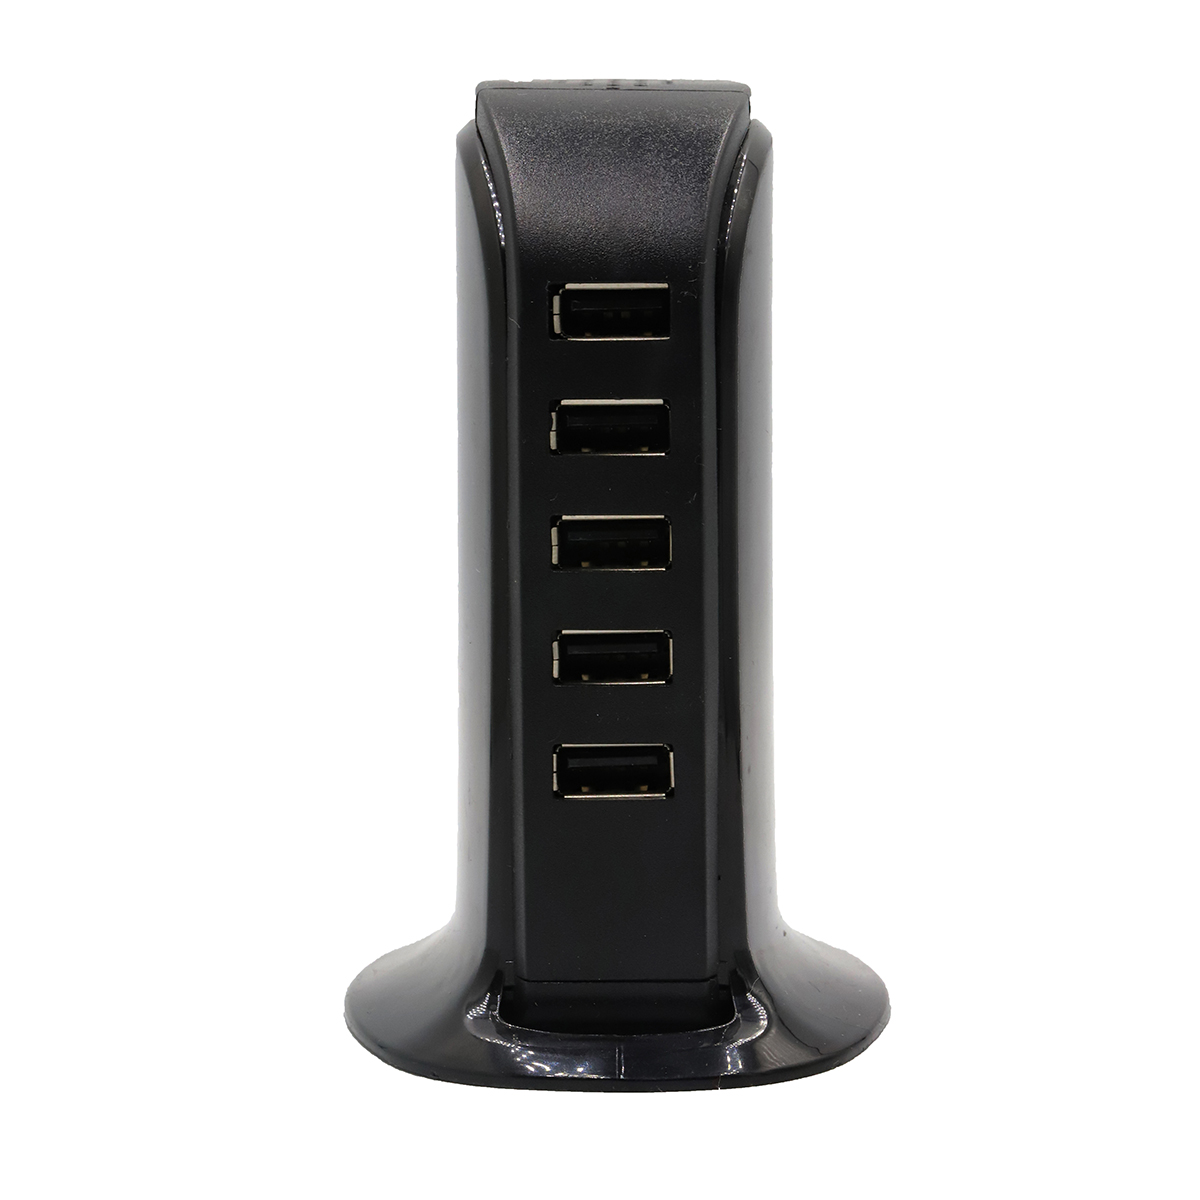 3. LM-J32 30W 5 USB Port Charger Station Bulk Purchase and Corporate purchase from China Union Power -Description-